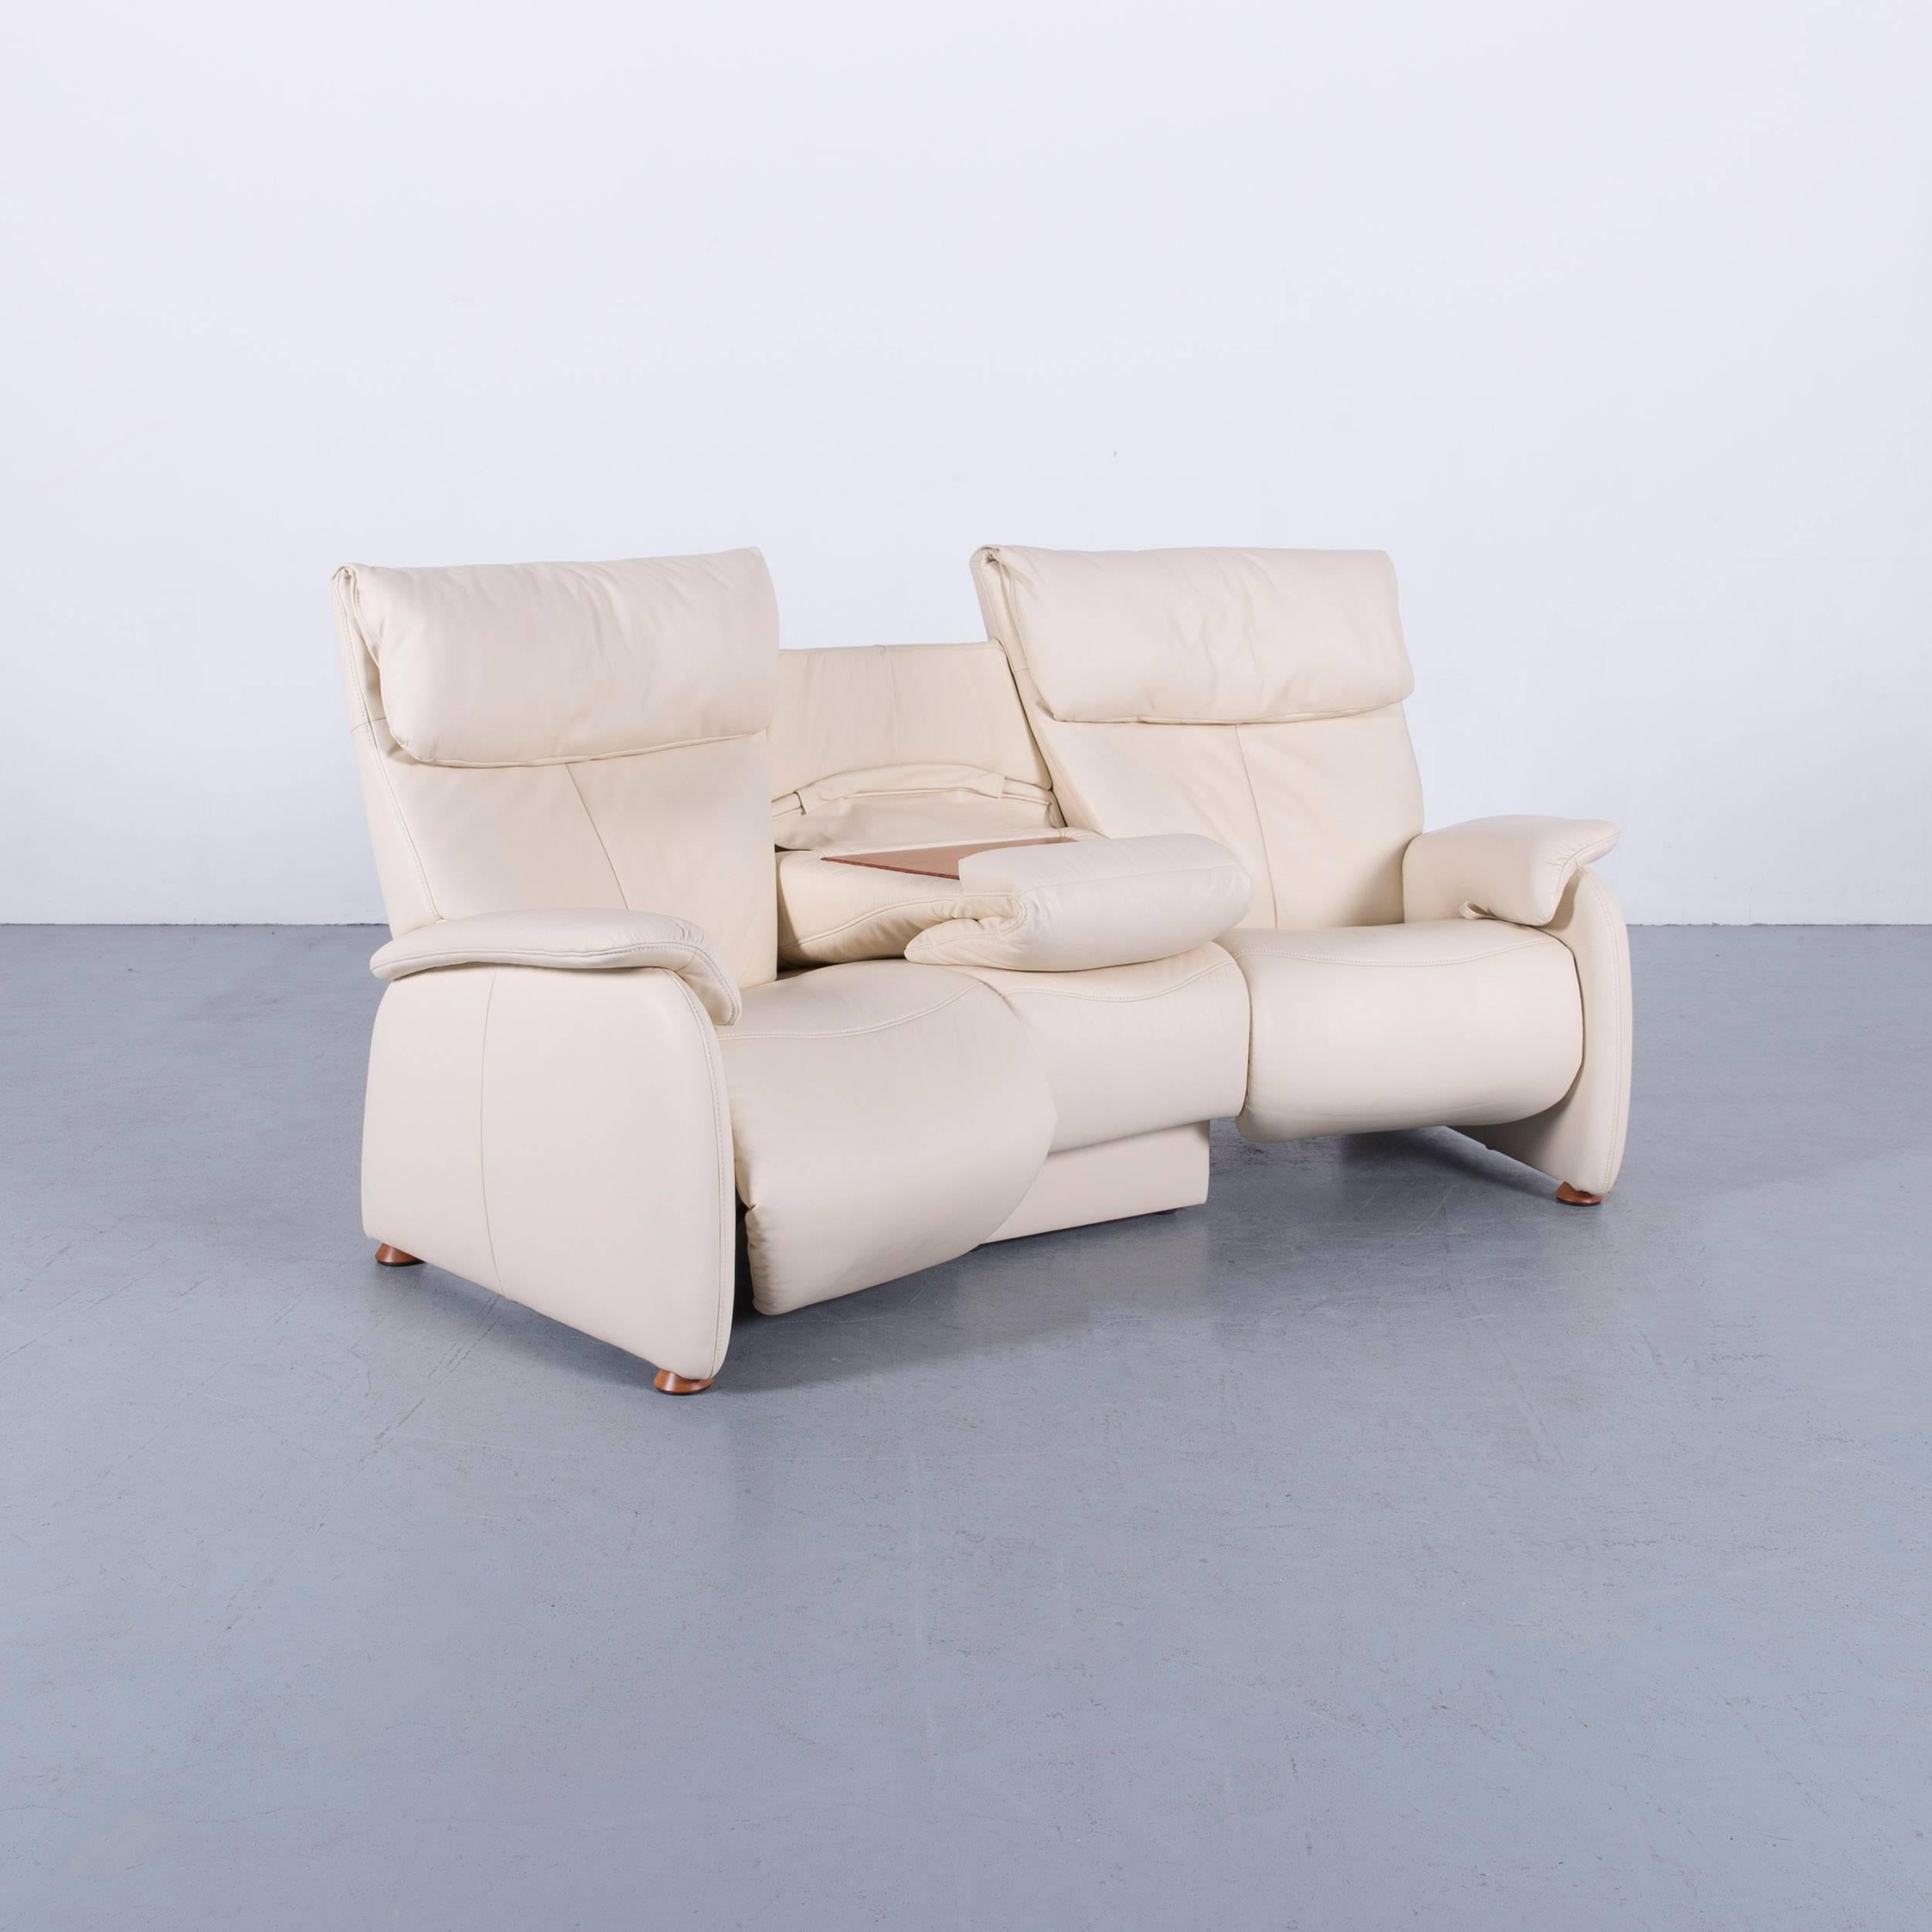 Leather Himolla Trapez Sofa Off-White Three-Seat Couch Recliner